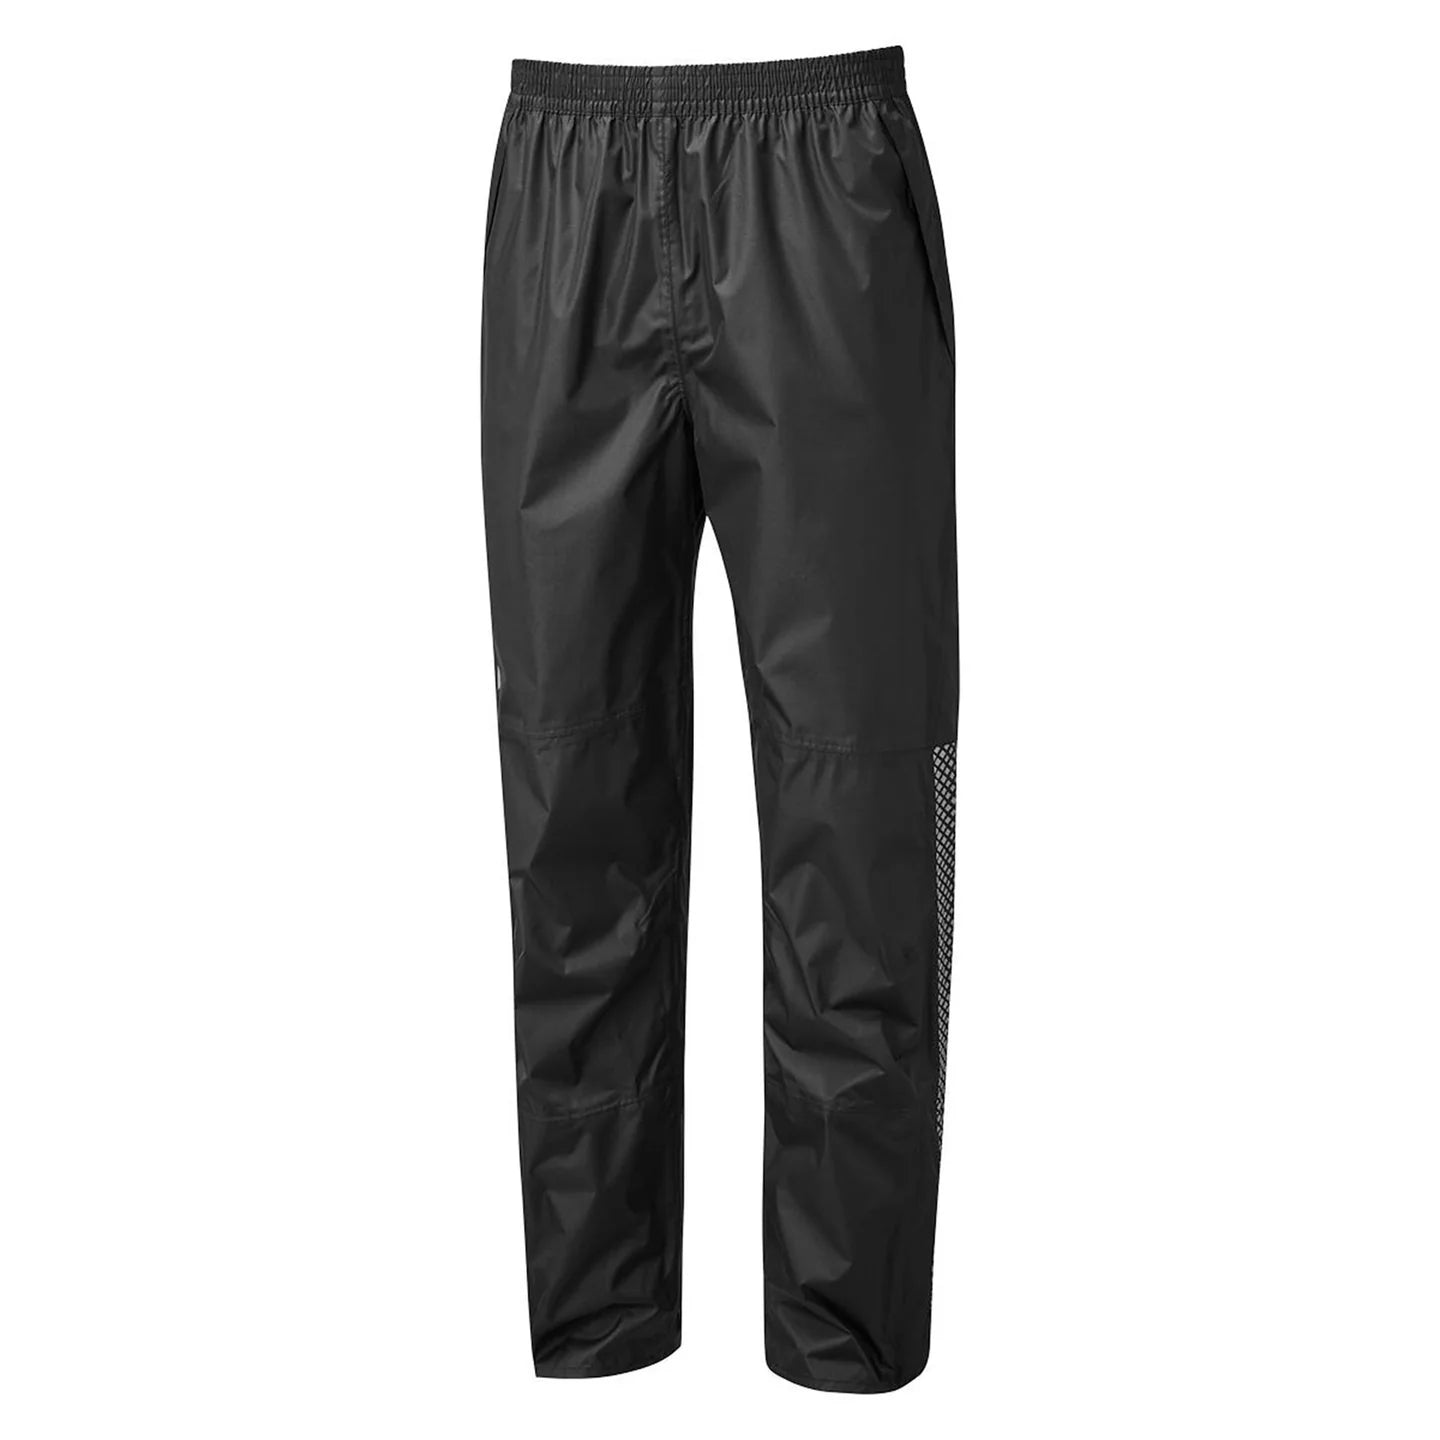 Altura Nightvision Waterproof Overtrouser